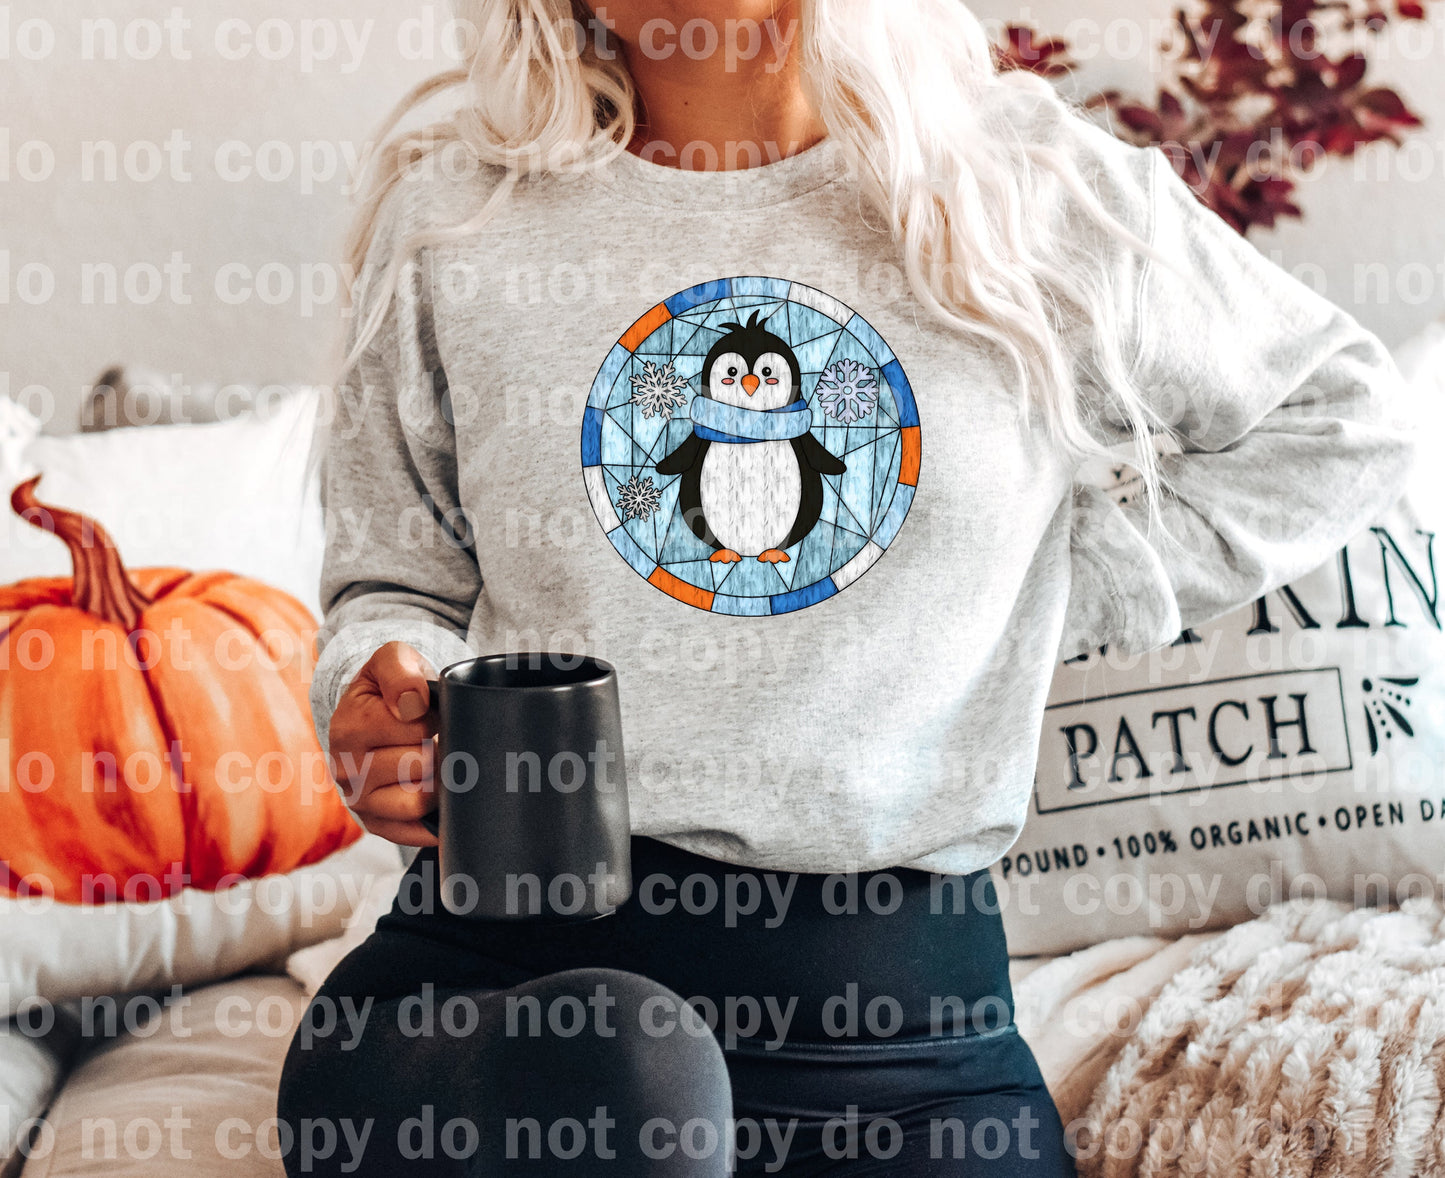 Stained Glass Penguin Blue Scarf Round Dream Print or Sublimation Print